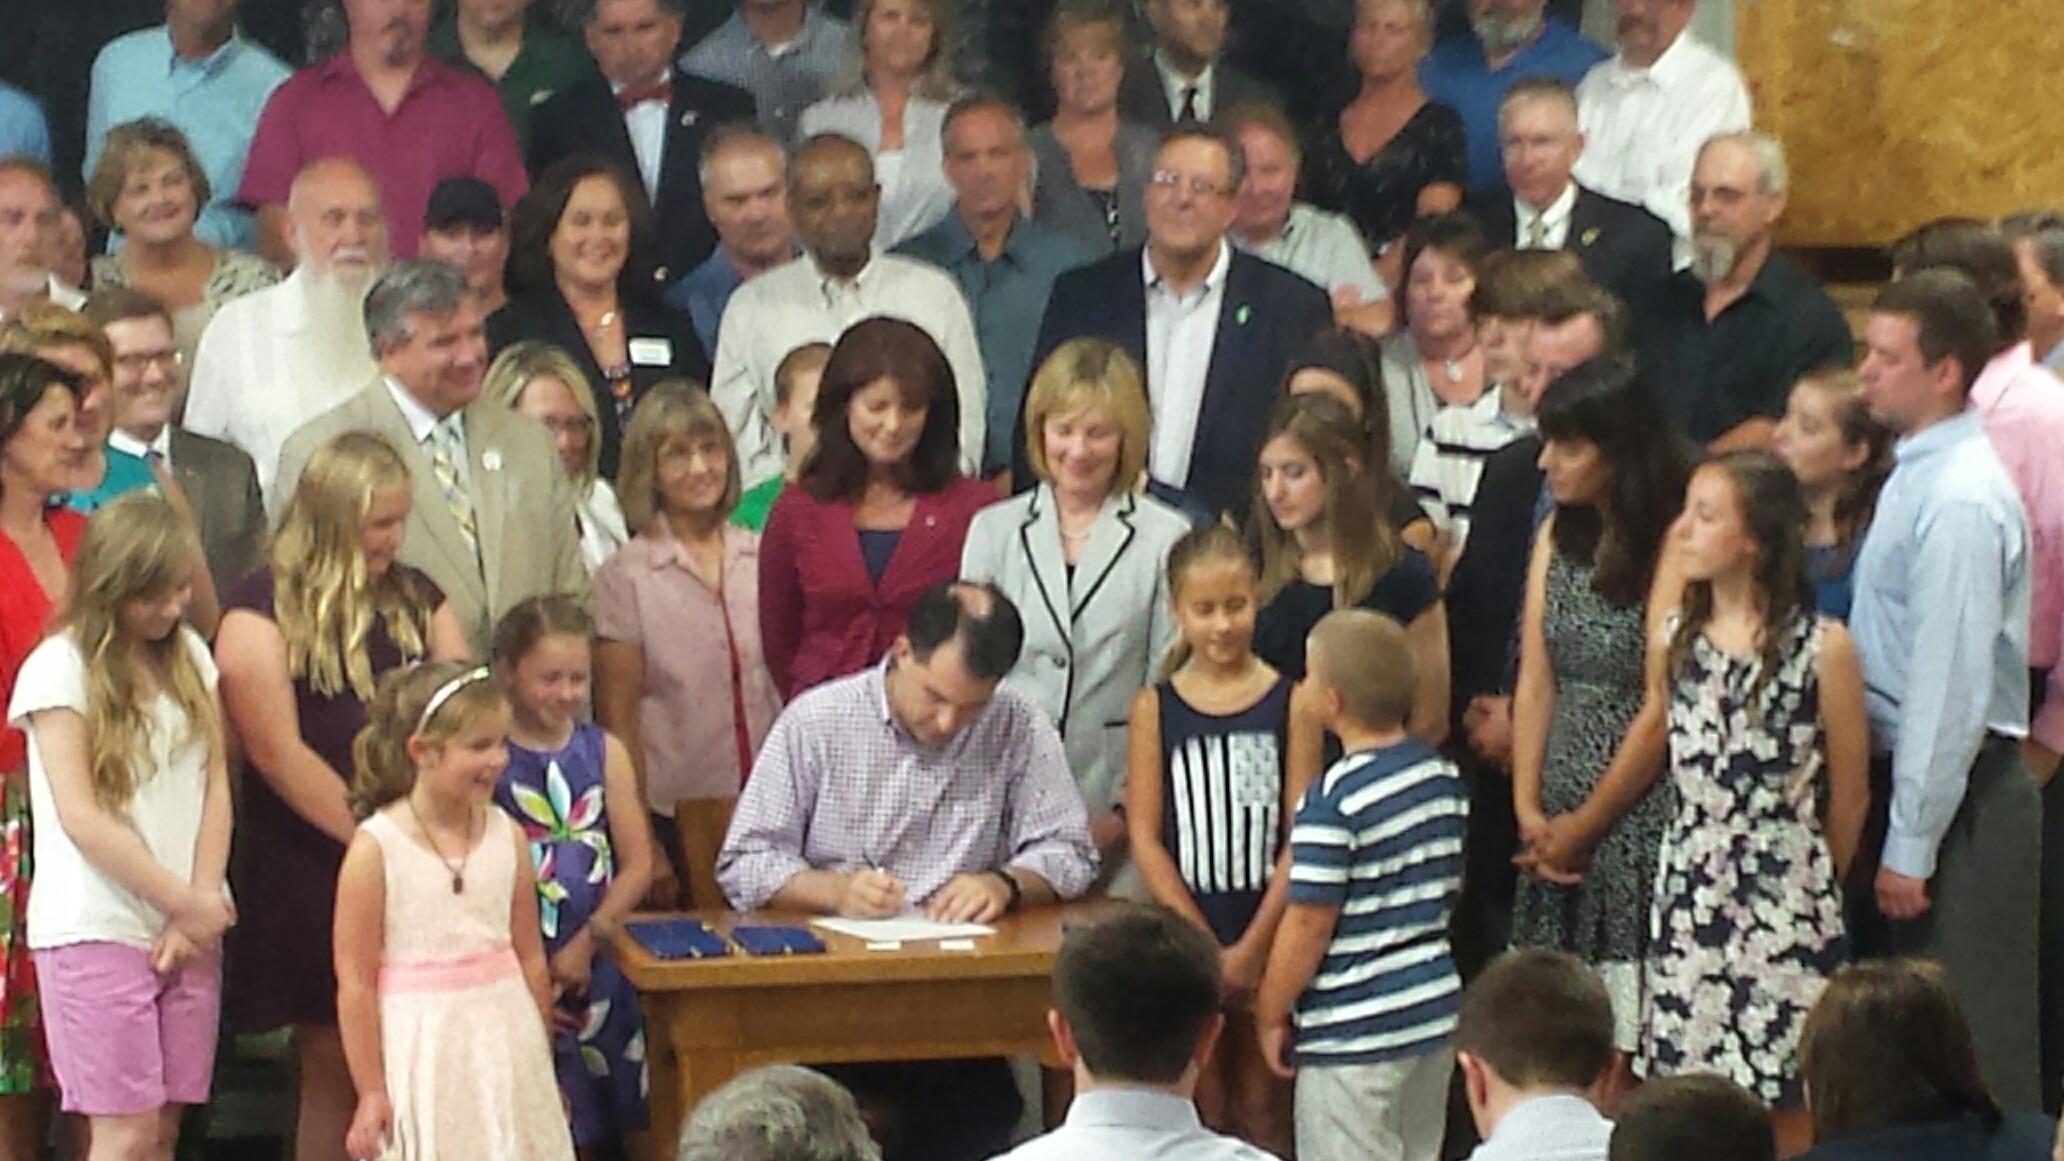 gov. walker signs state budget before supporters